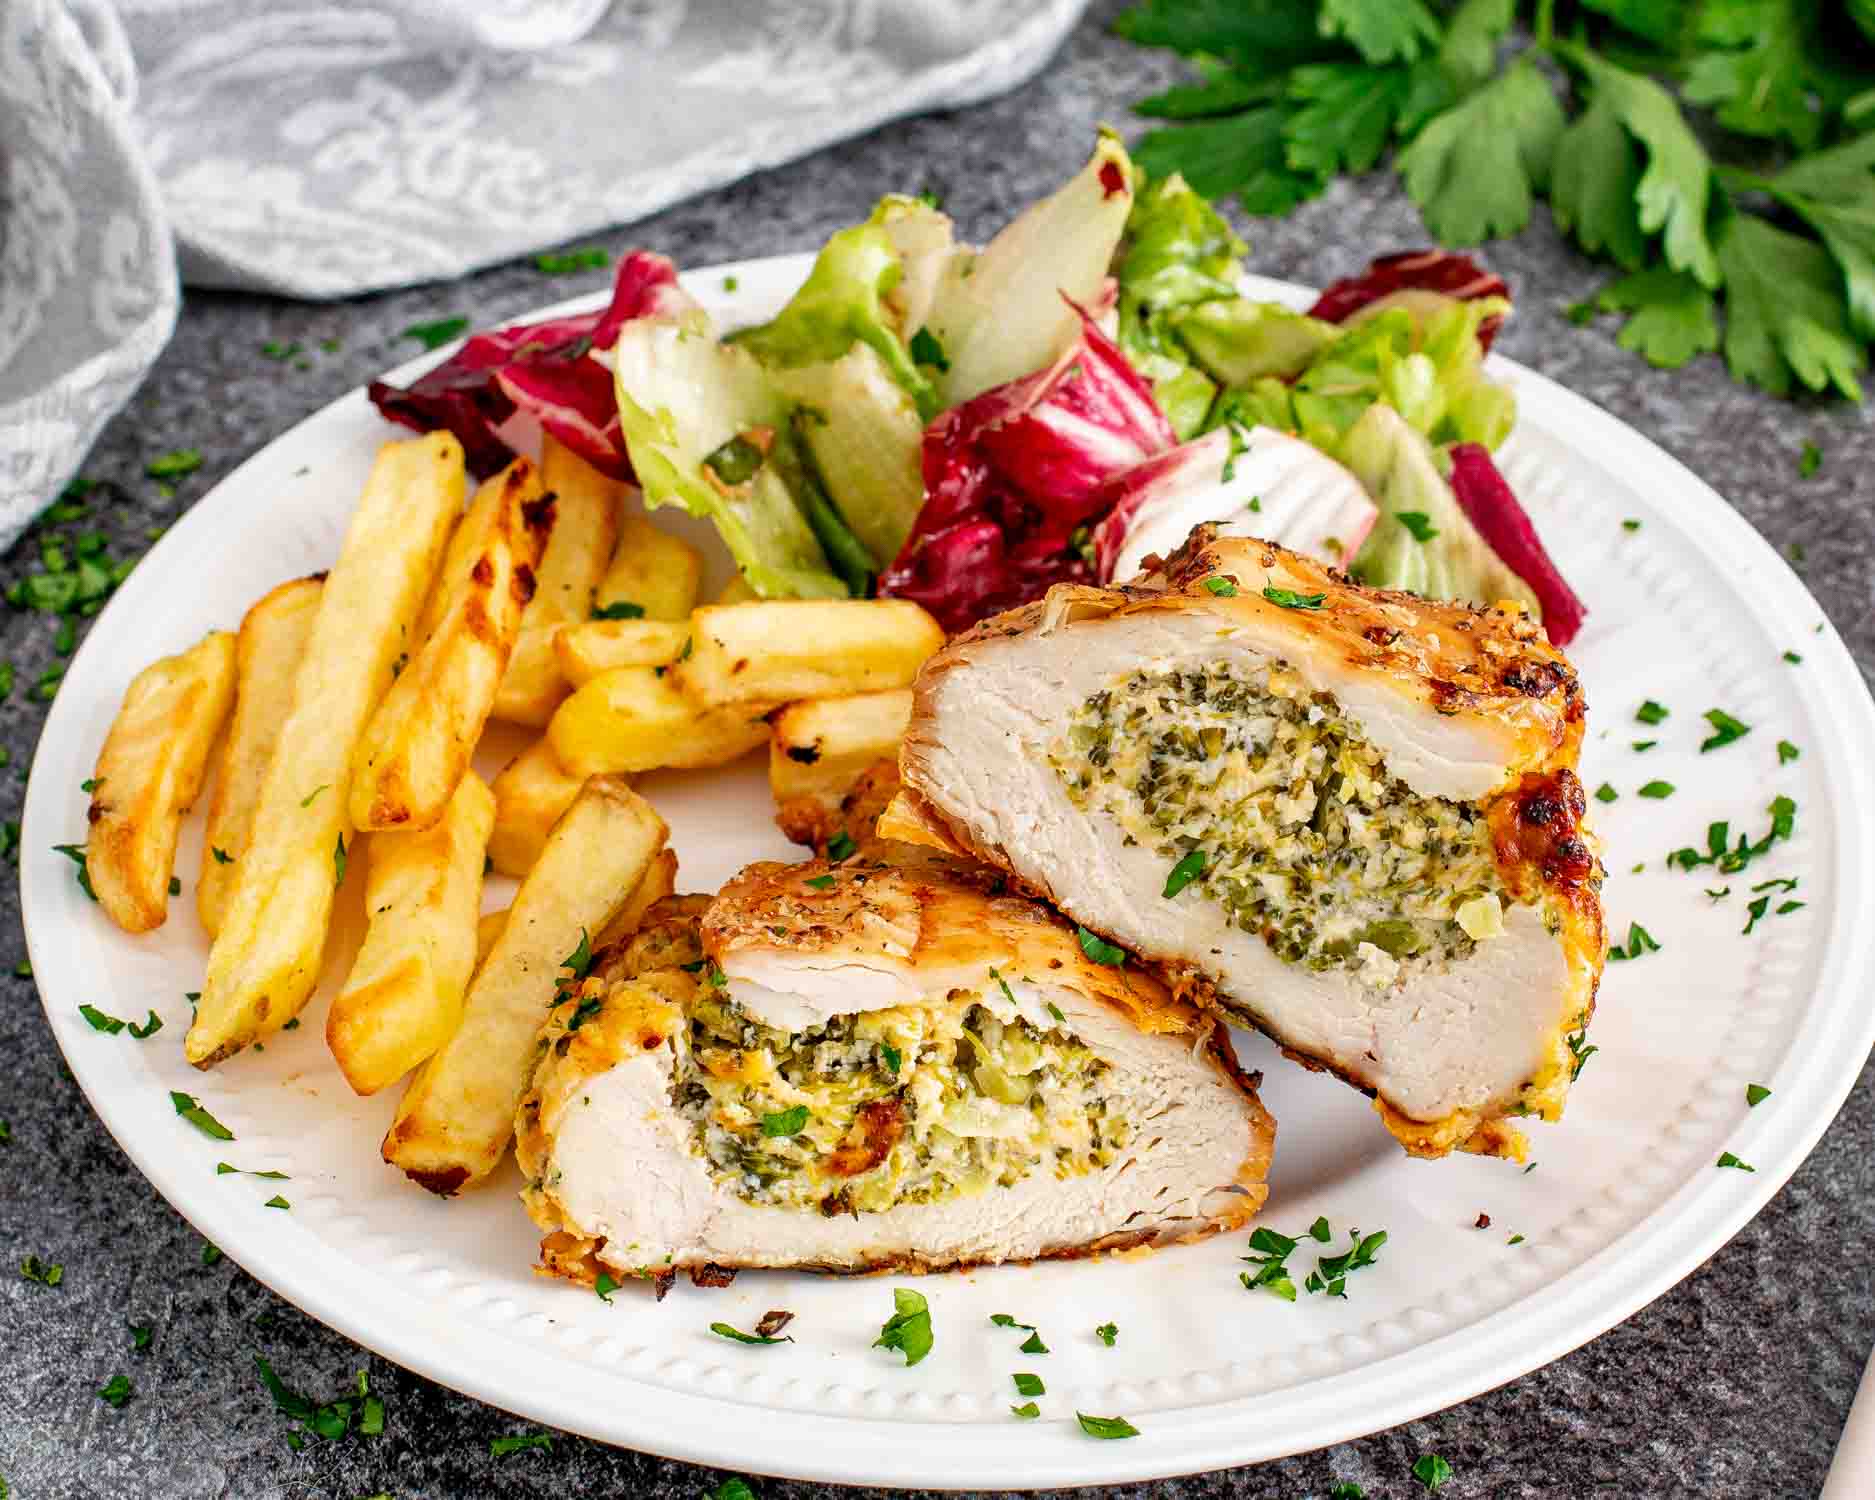 a broccoli cheese stuffed chicken breast cut in half on a plate with french fries and a salad.